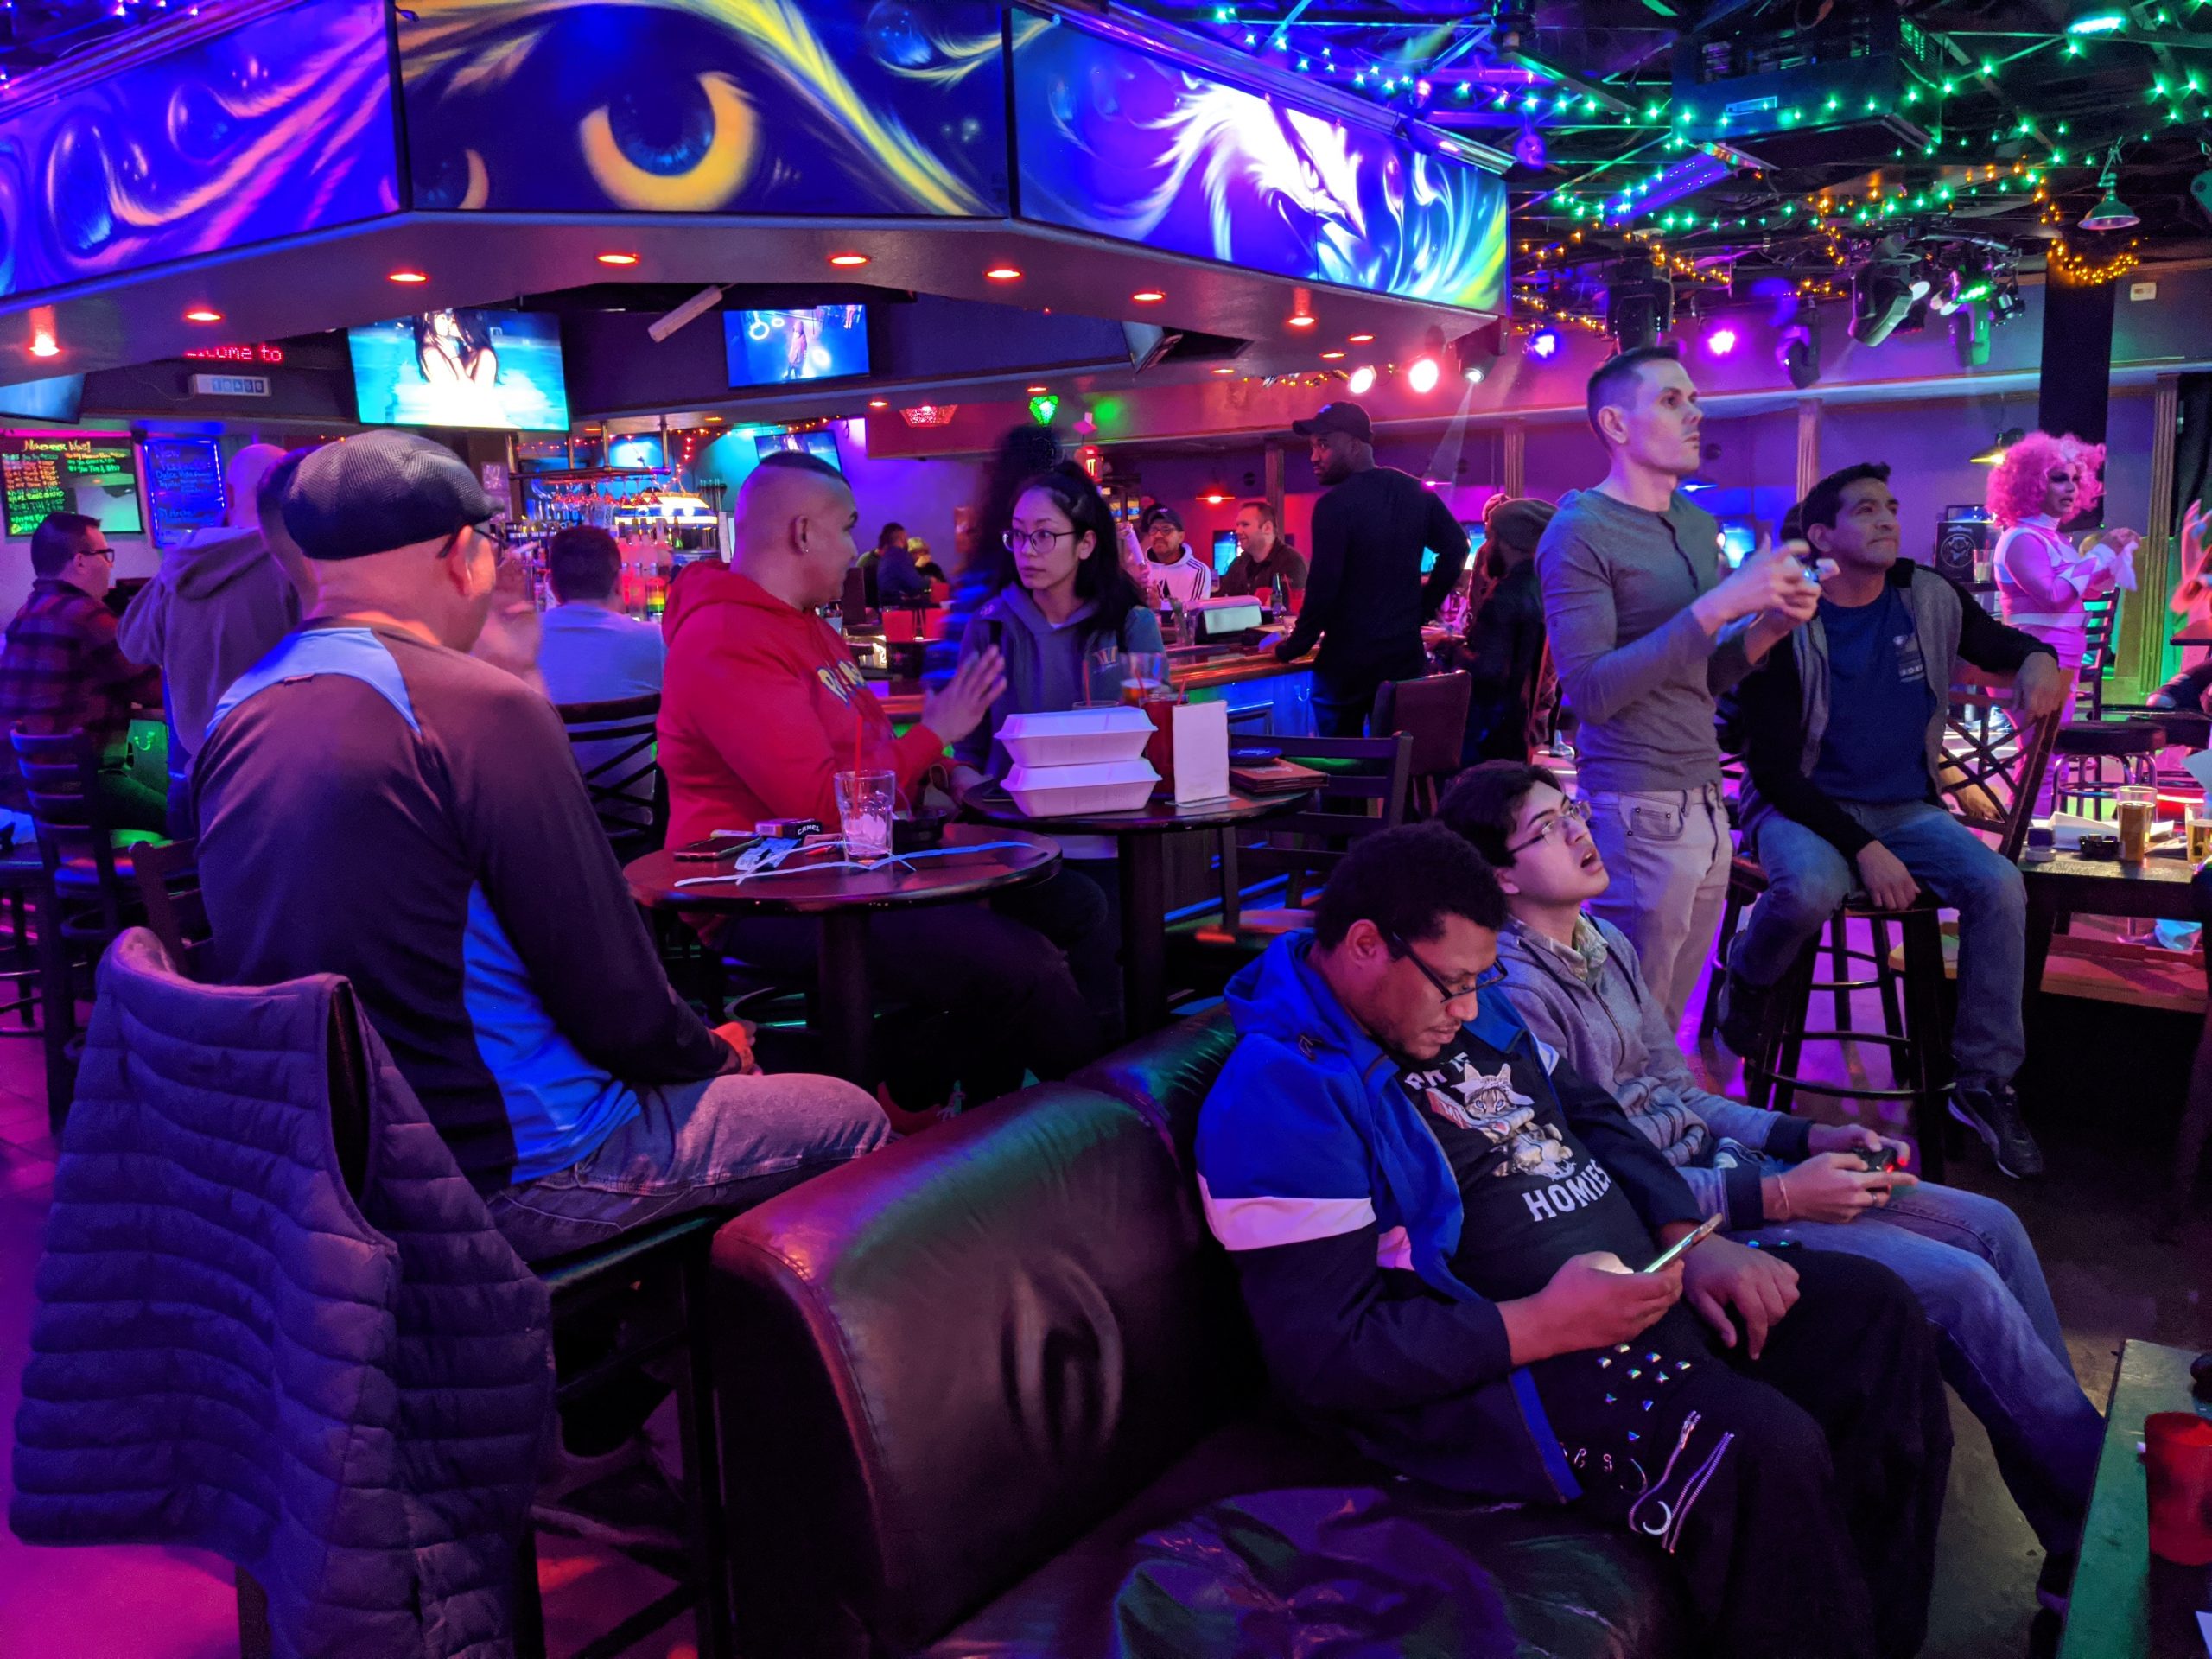 About the Las Vegas Gaymers at the Phoenix Bar and Lounge